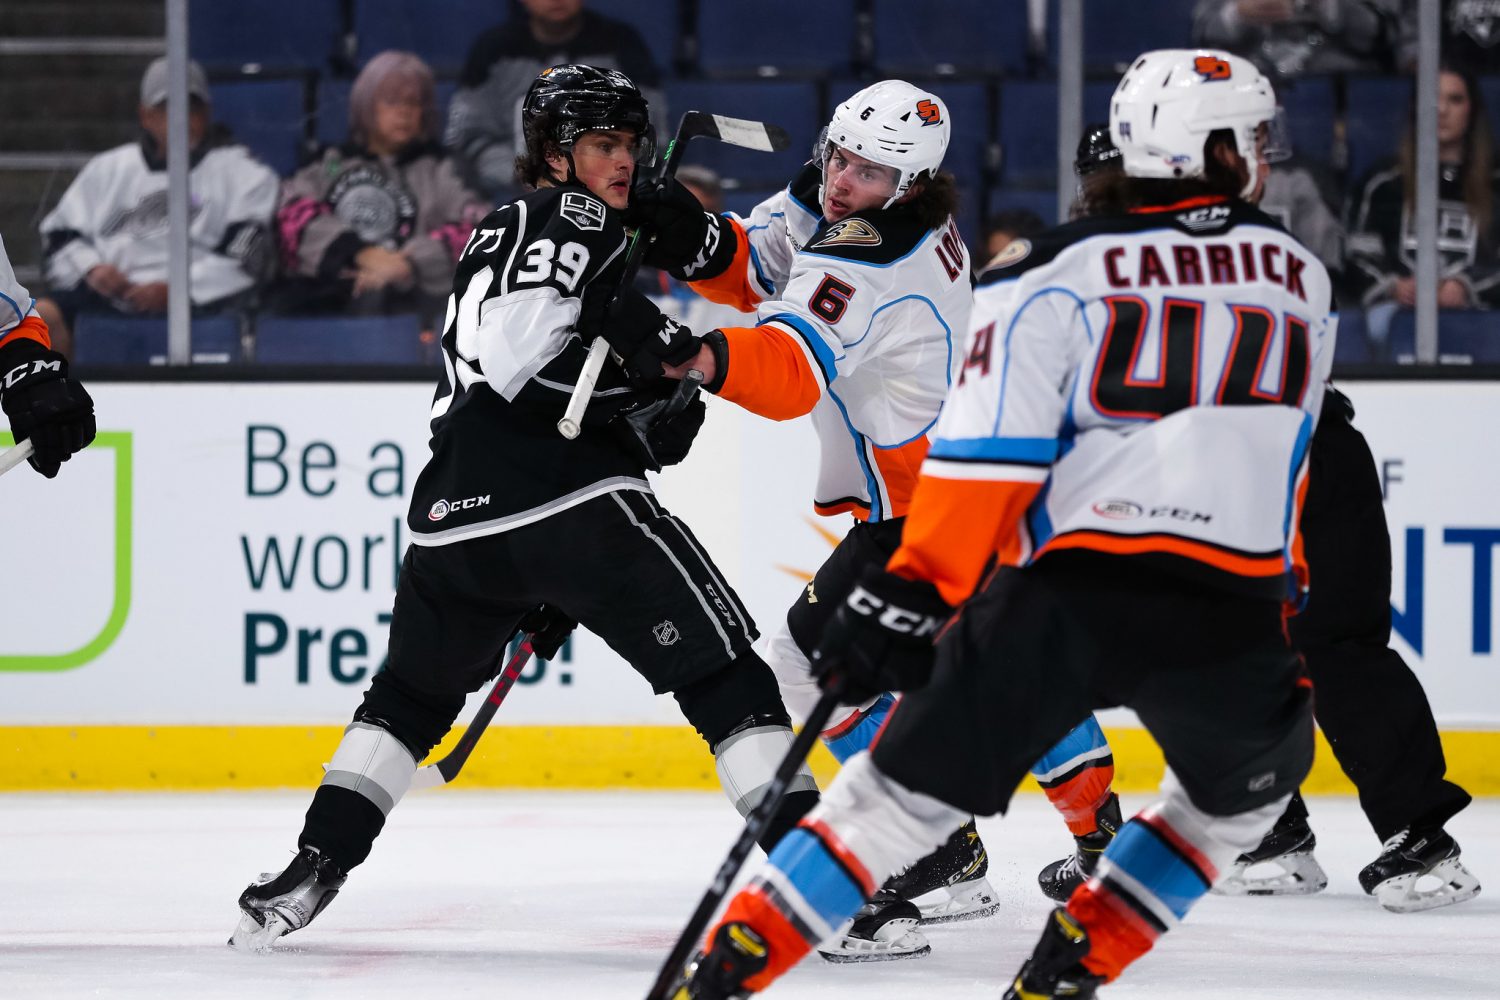 Kings sign forward Taylor Ward to entry-level contract, +  Frk/Wolanin/Hickey assigned to Ontario - LA Kings Insider